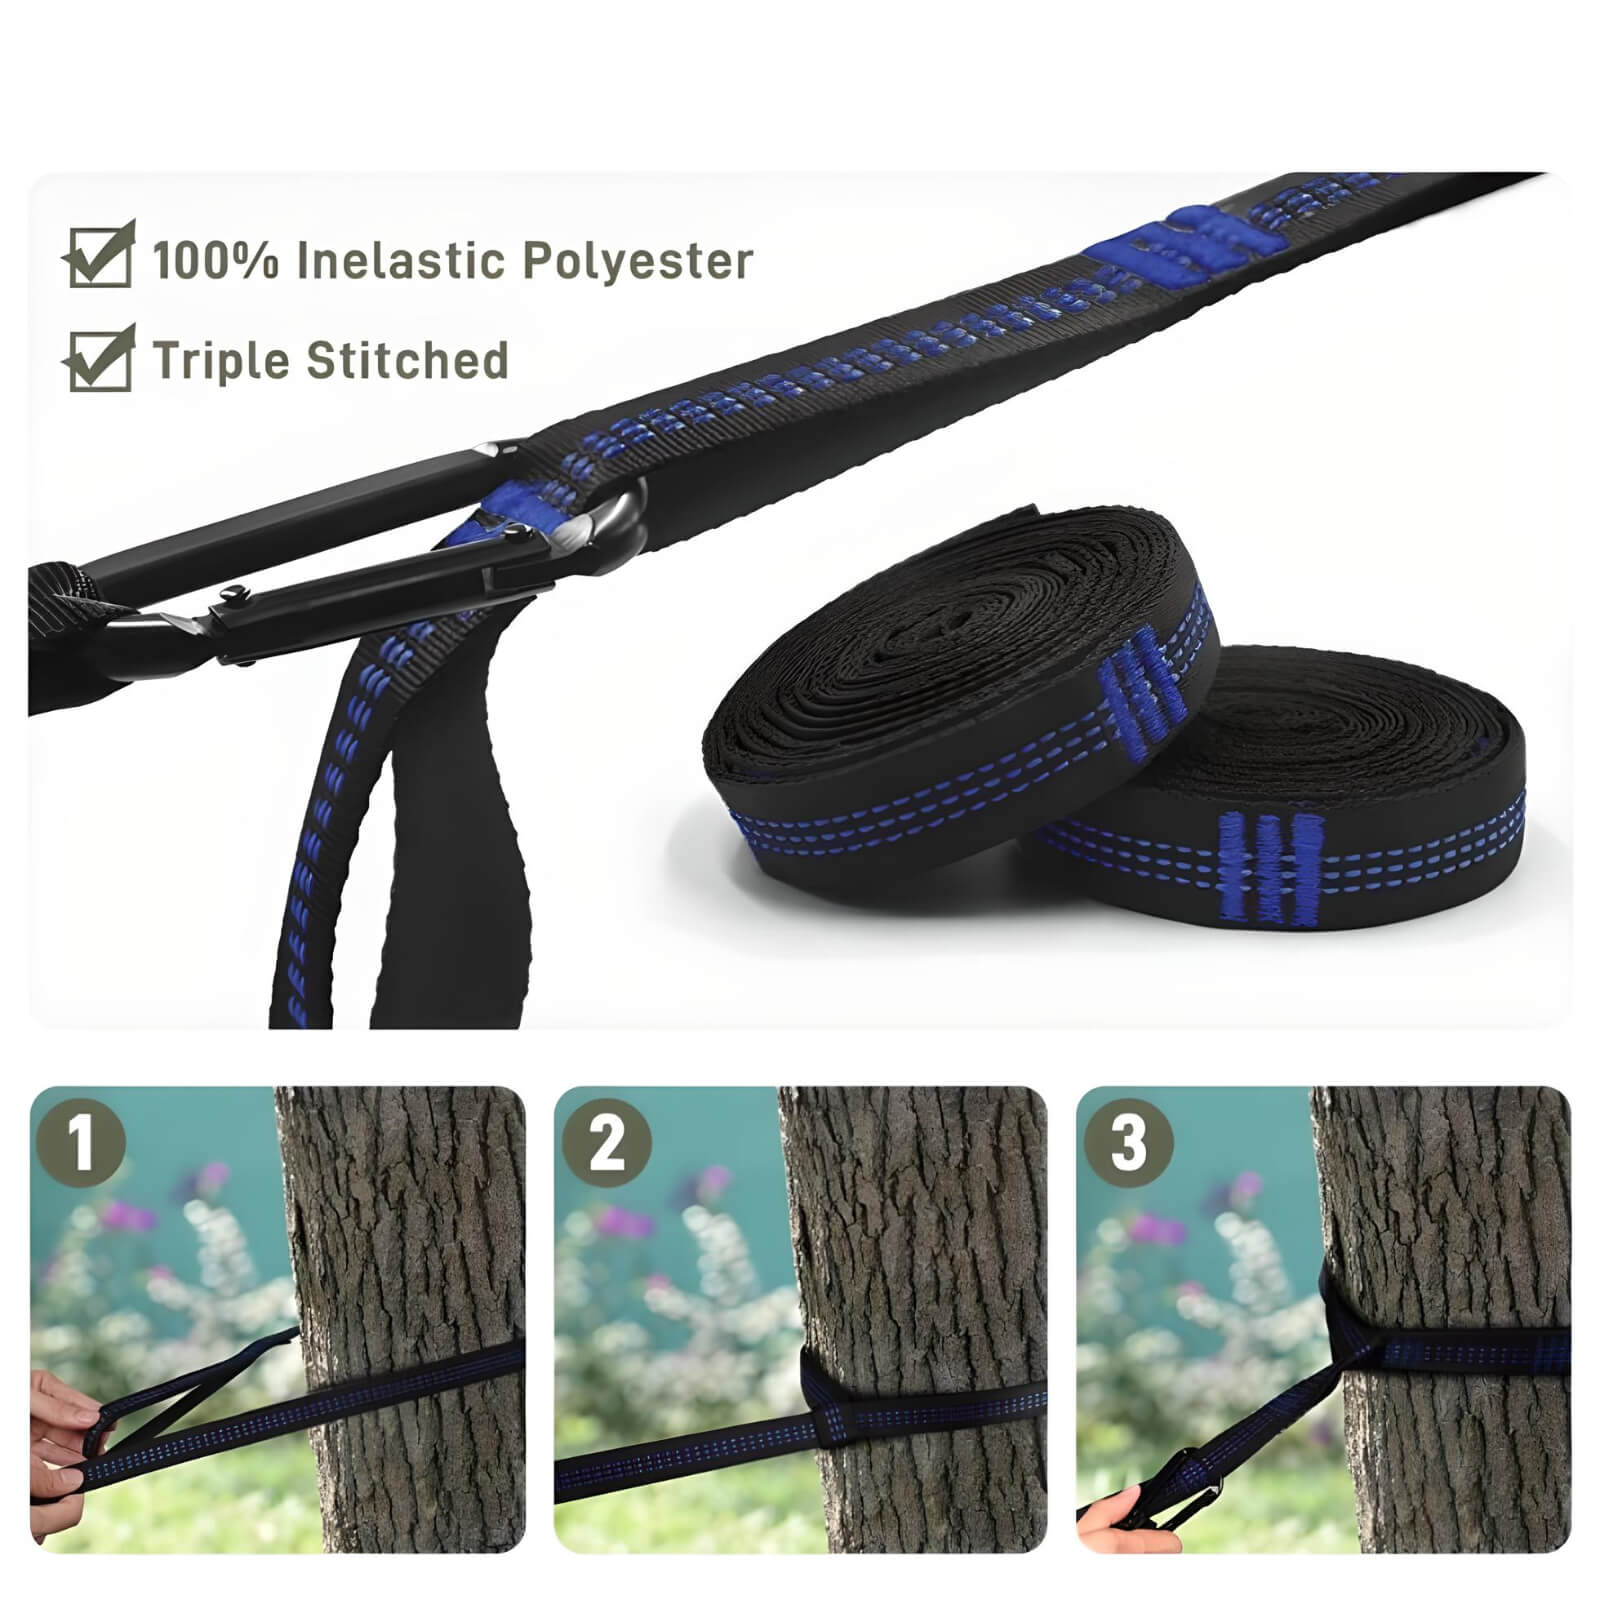 back-packing-tree-tent-material-details